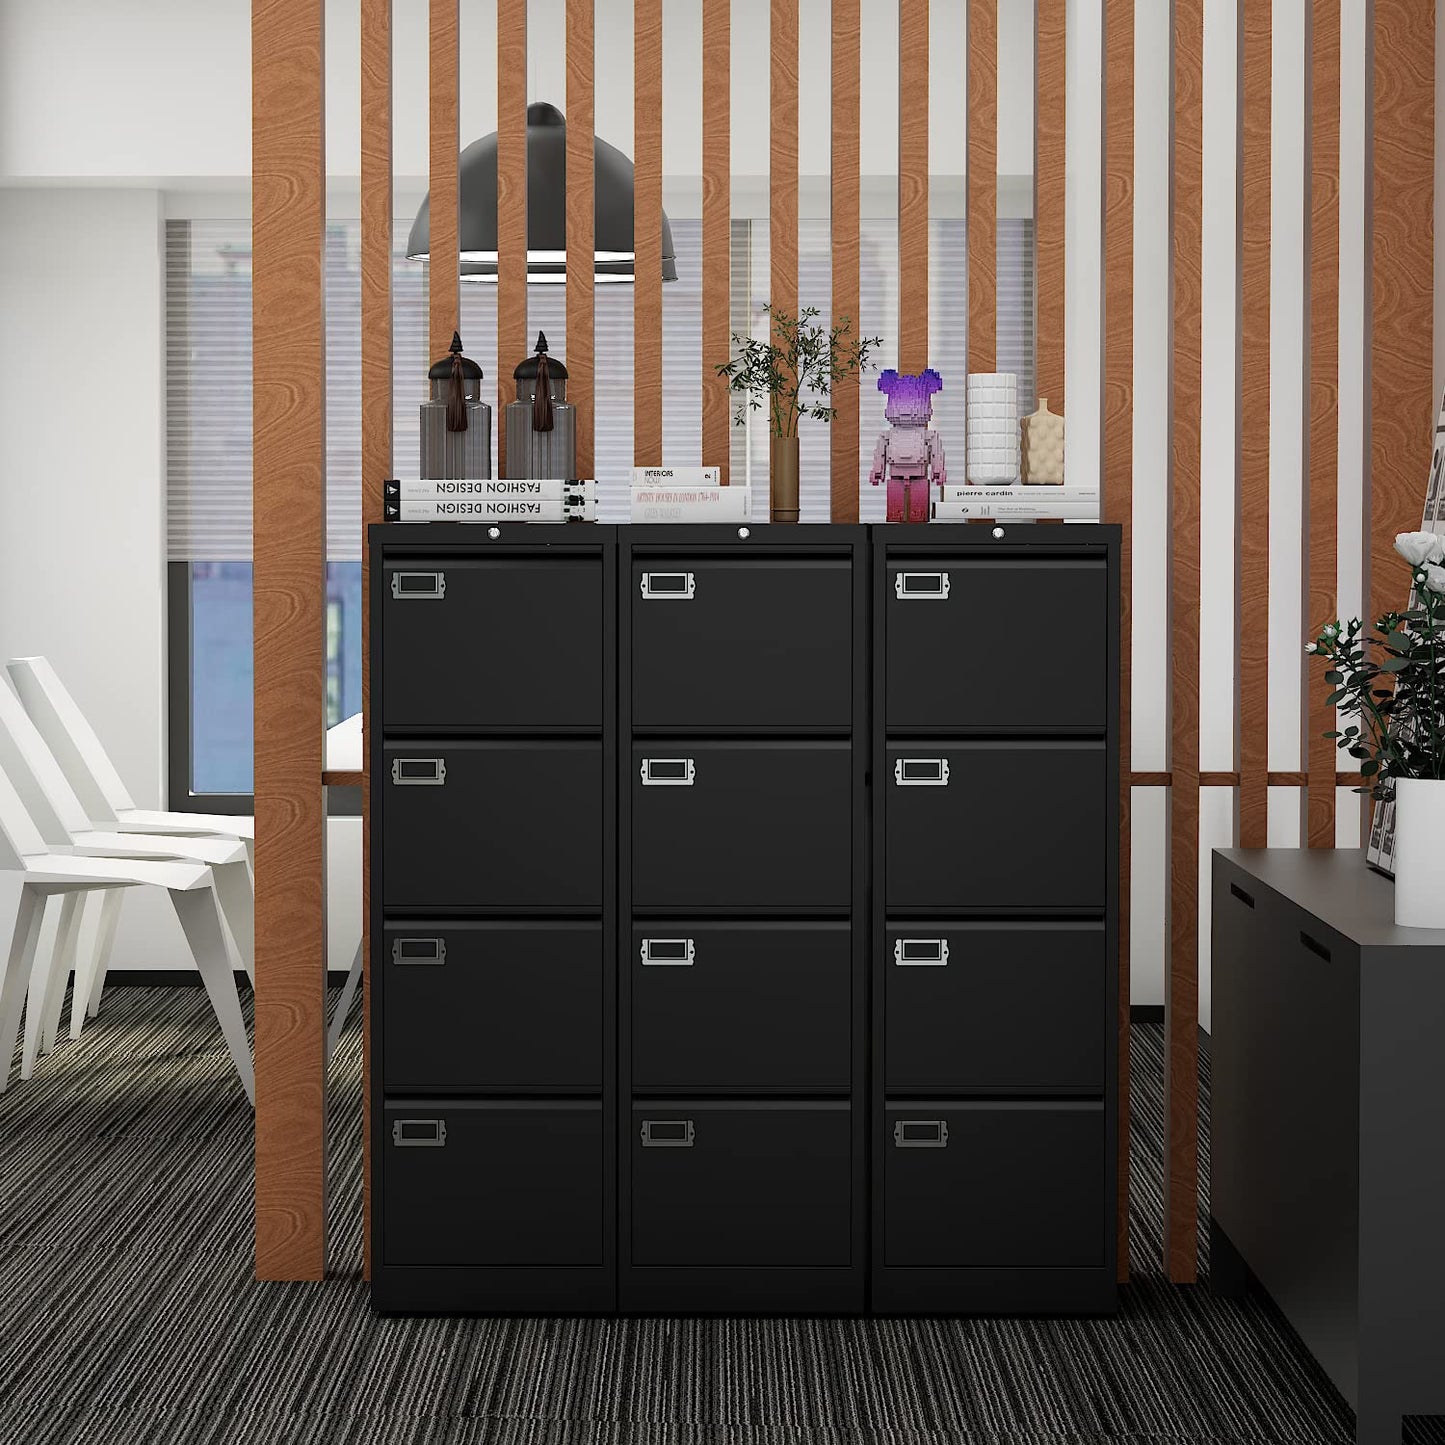 Fesbos 4 Drawers Vertical File Cabinets - Lateral Filing Cabinets - Metal Steel Lockable Storage Cabinets for Home Office to Hanging Files Letter/Legal/F4/A4 Size